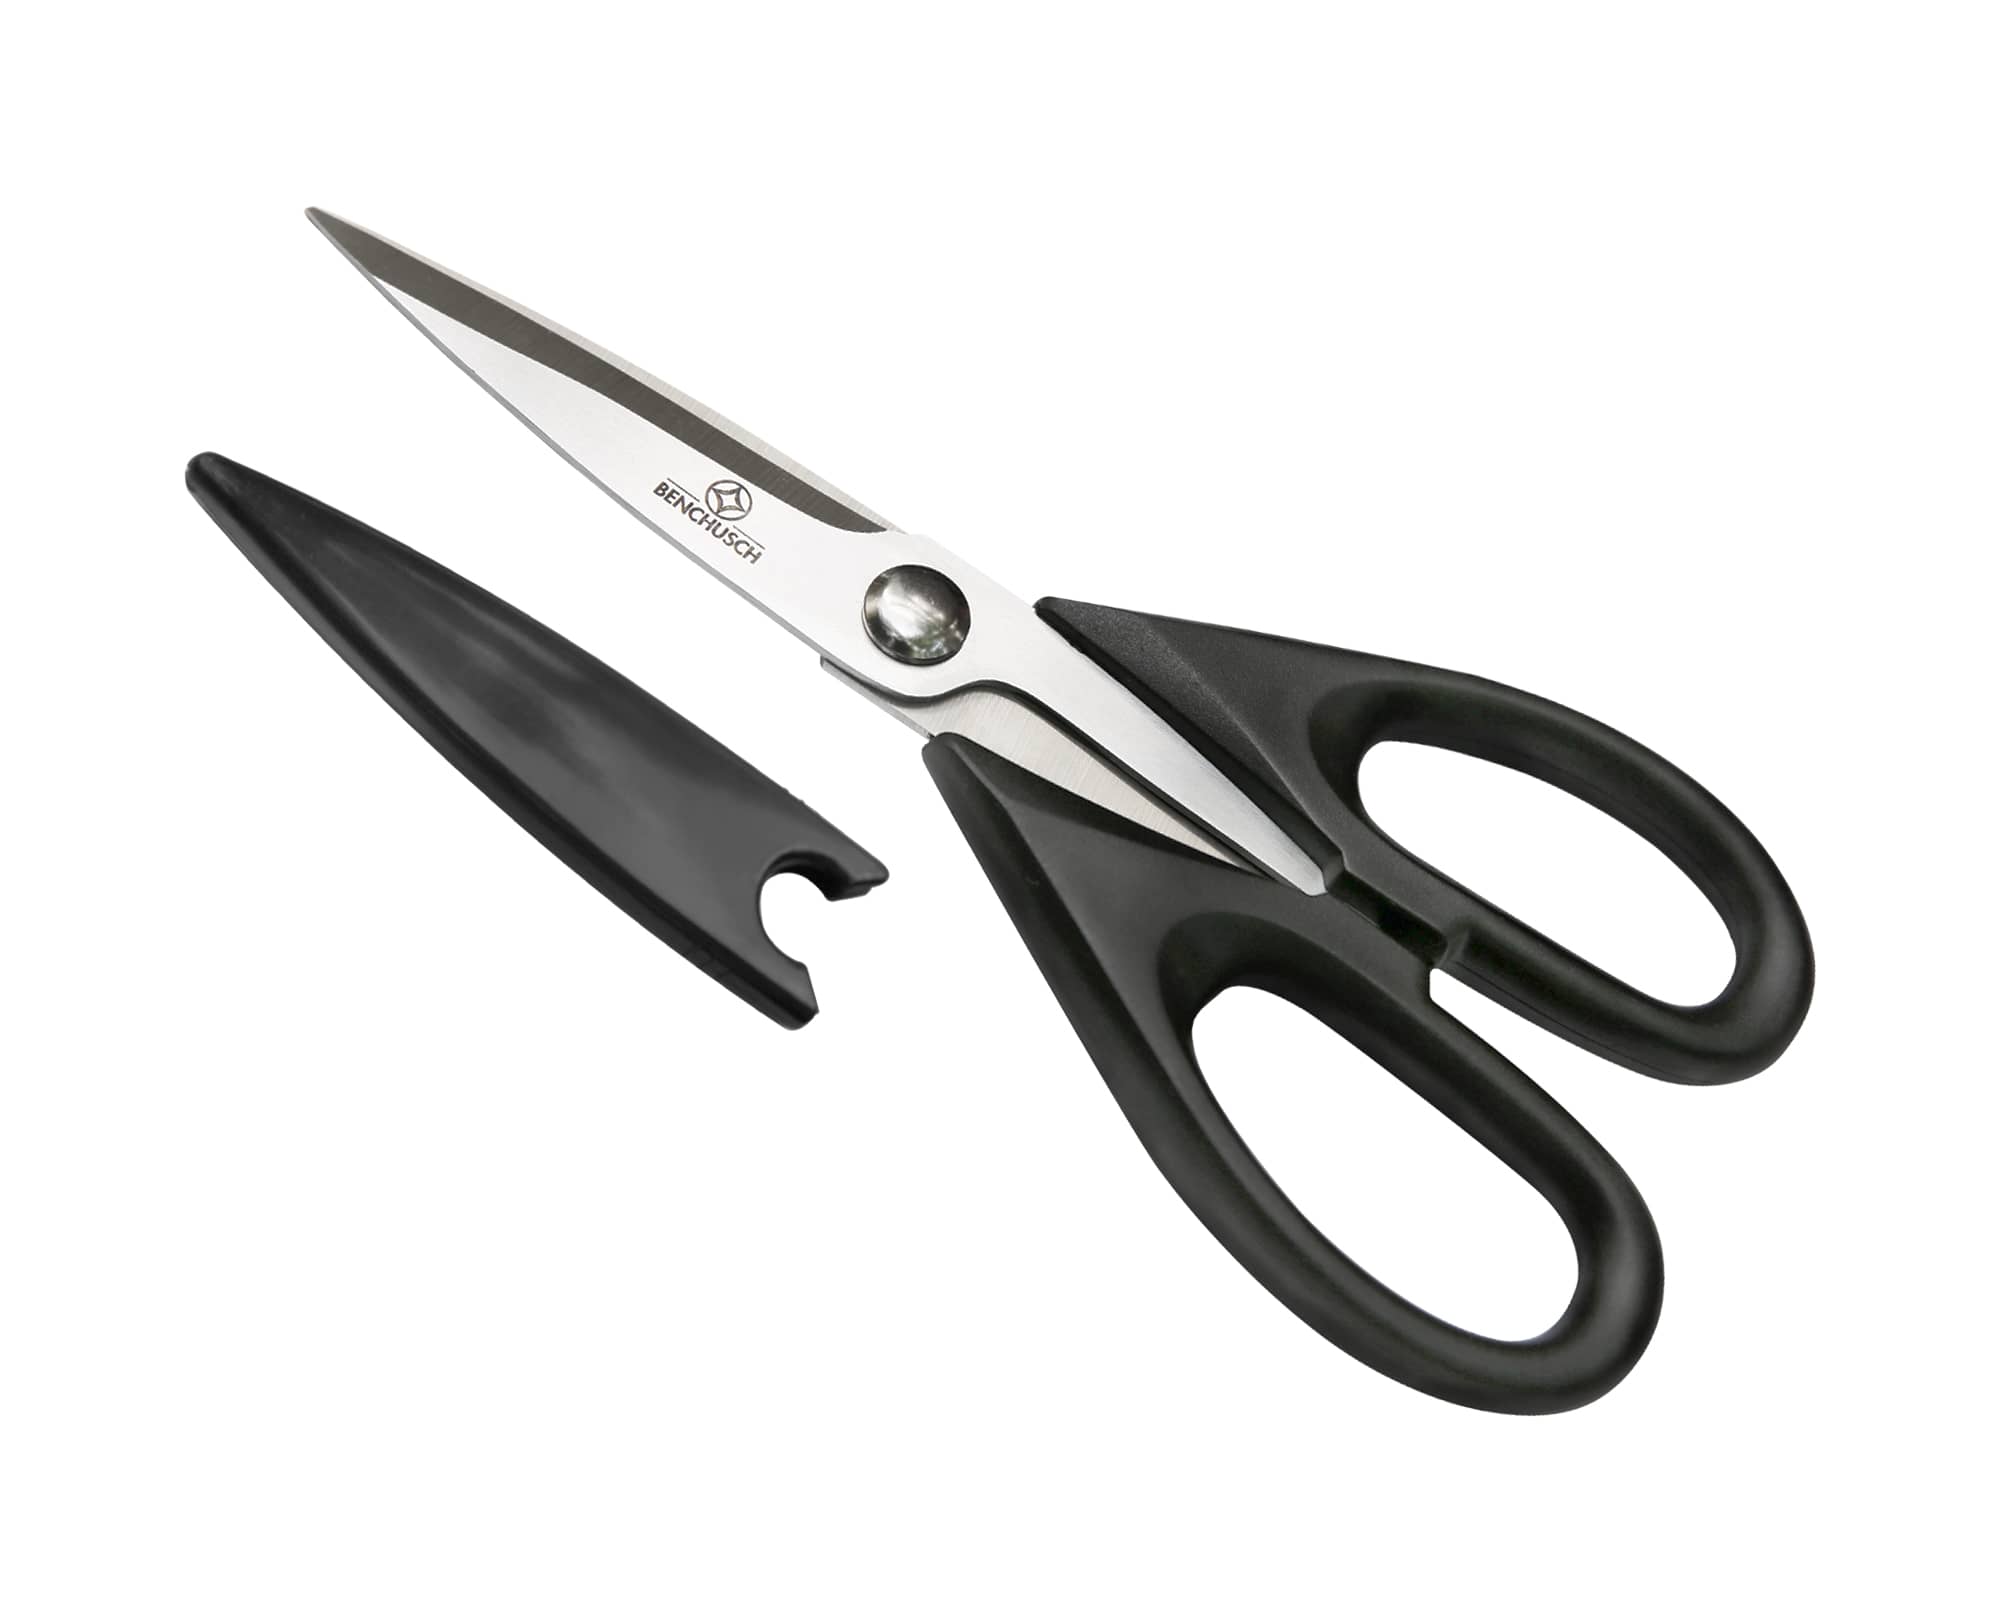 Benchusch Heavy Duty Kitchen Shears, black color with stainless steel blade, PP handles and cover